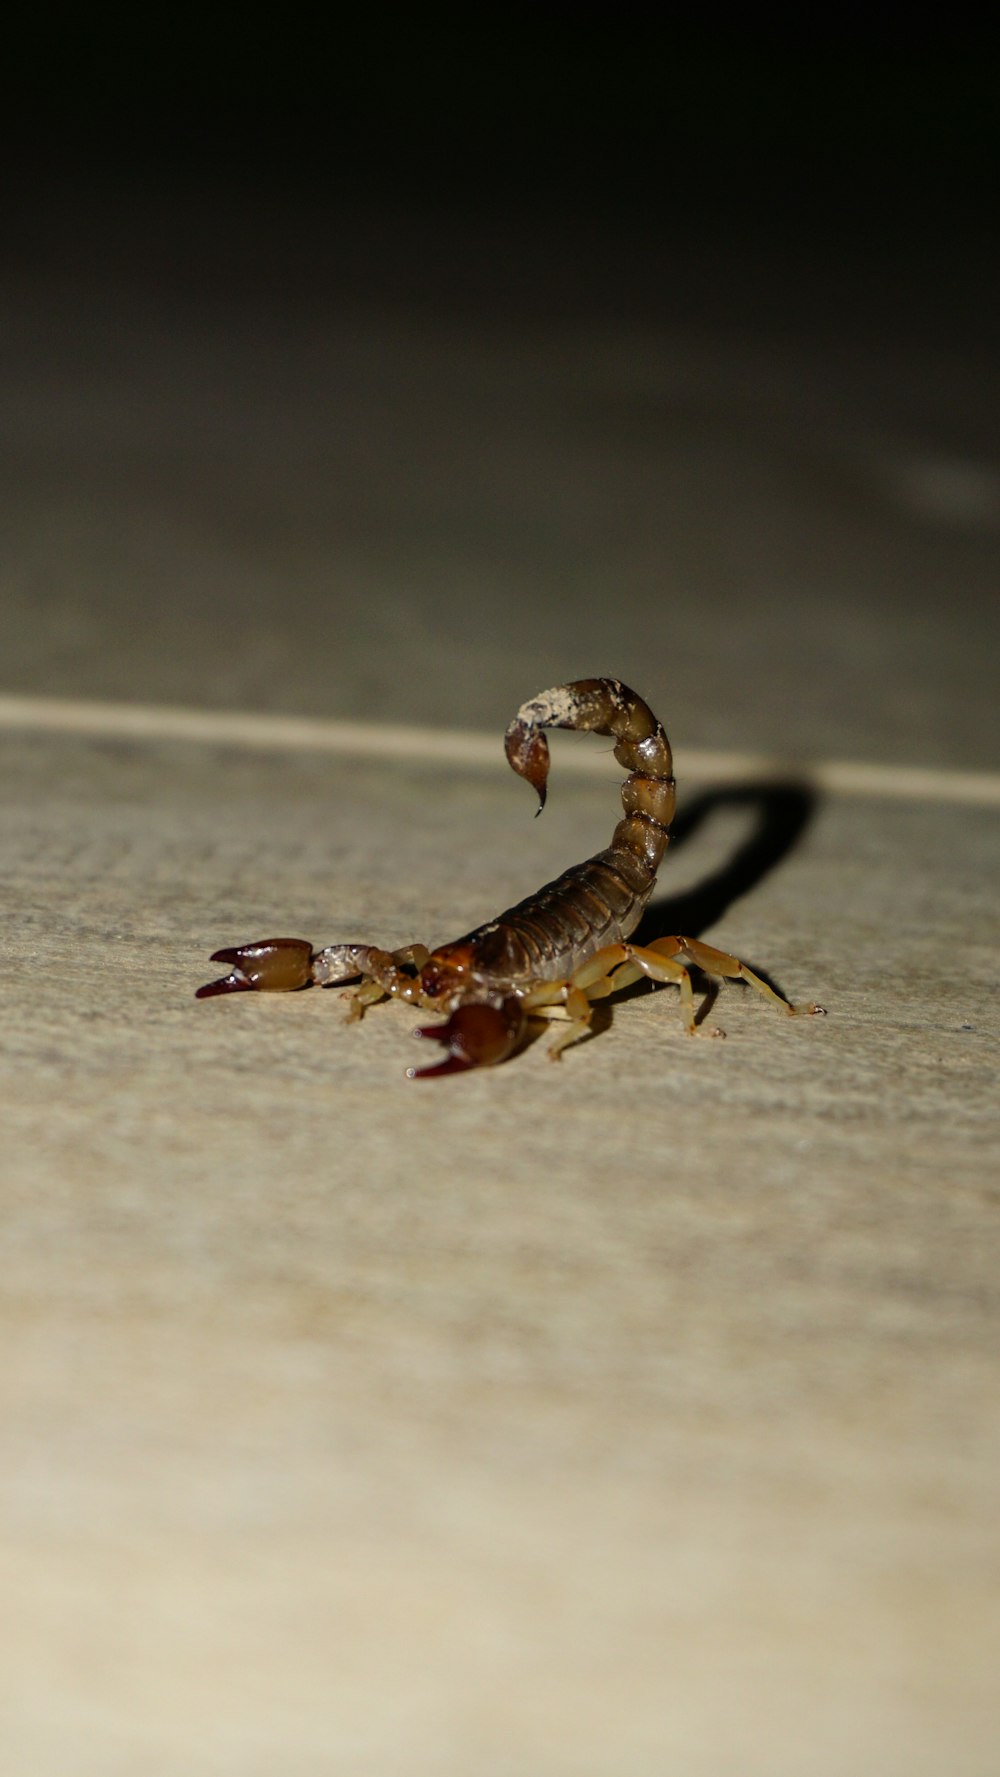 a scorpion crawling on the ground in the dark